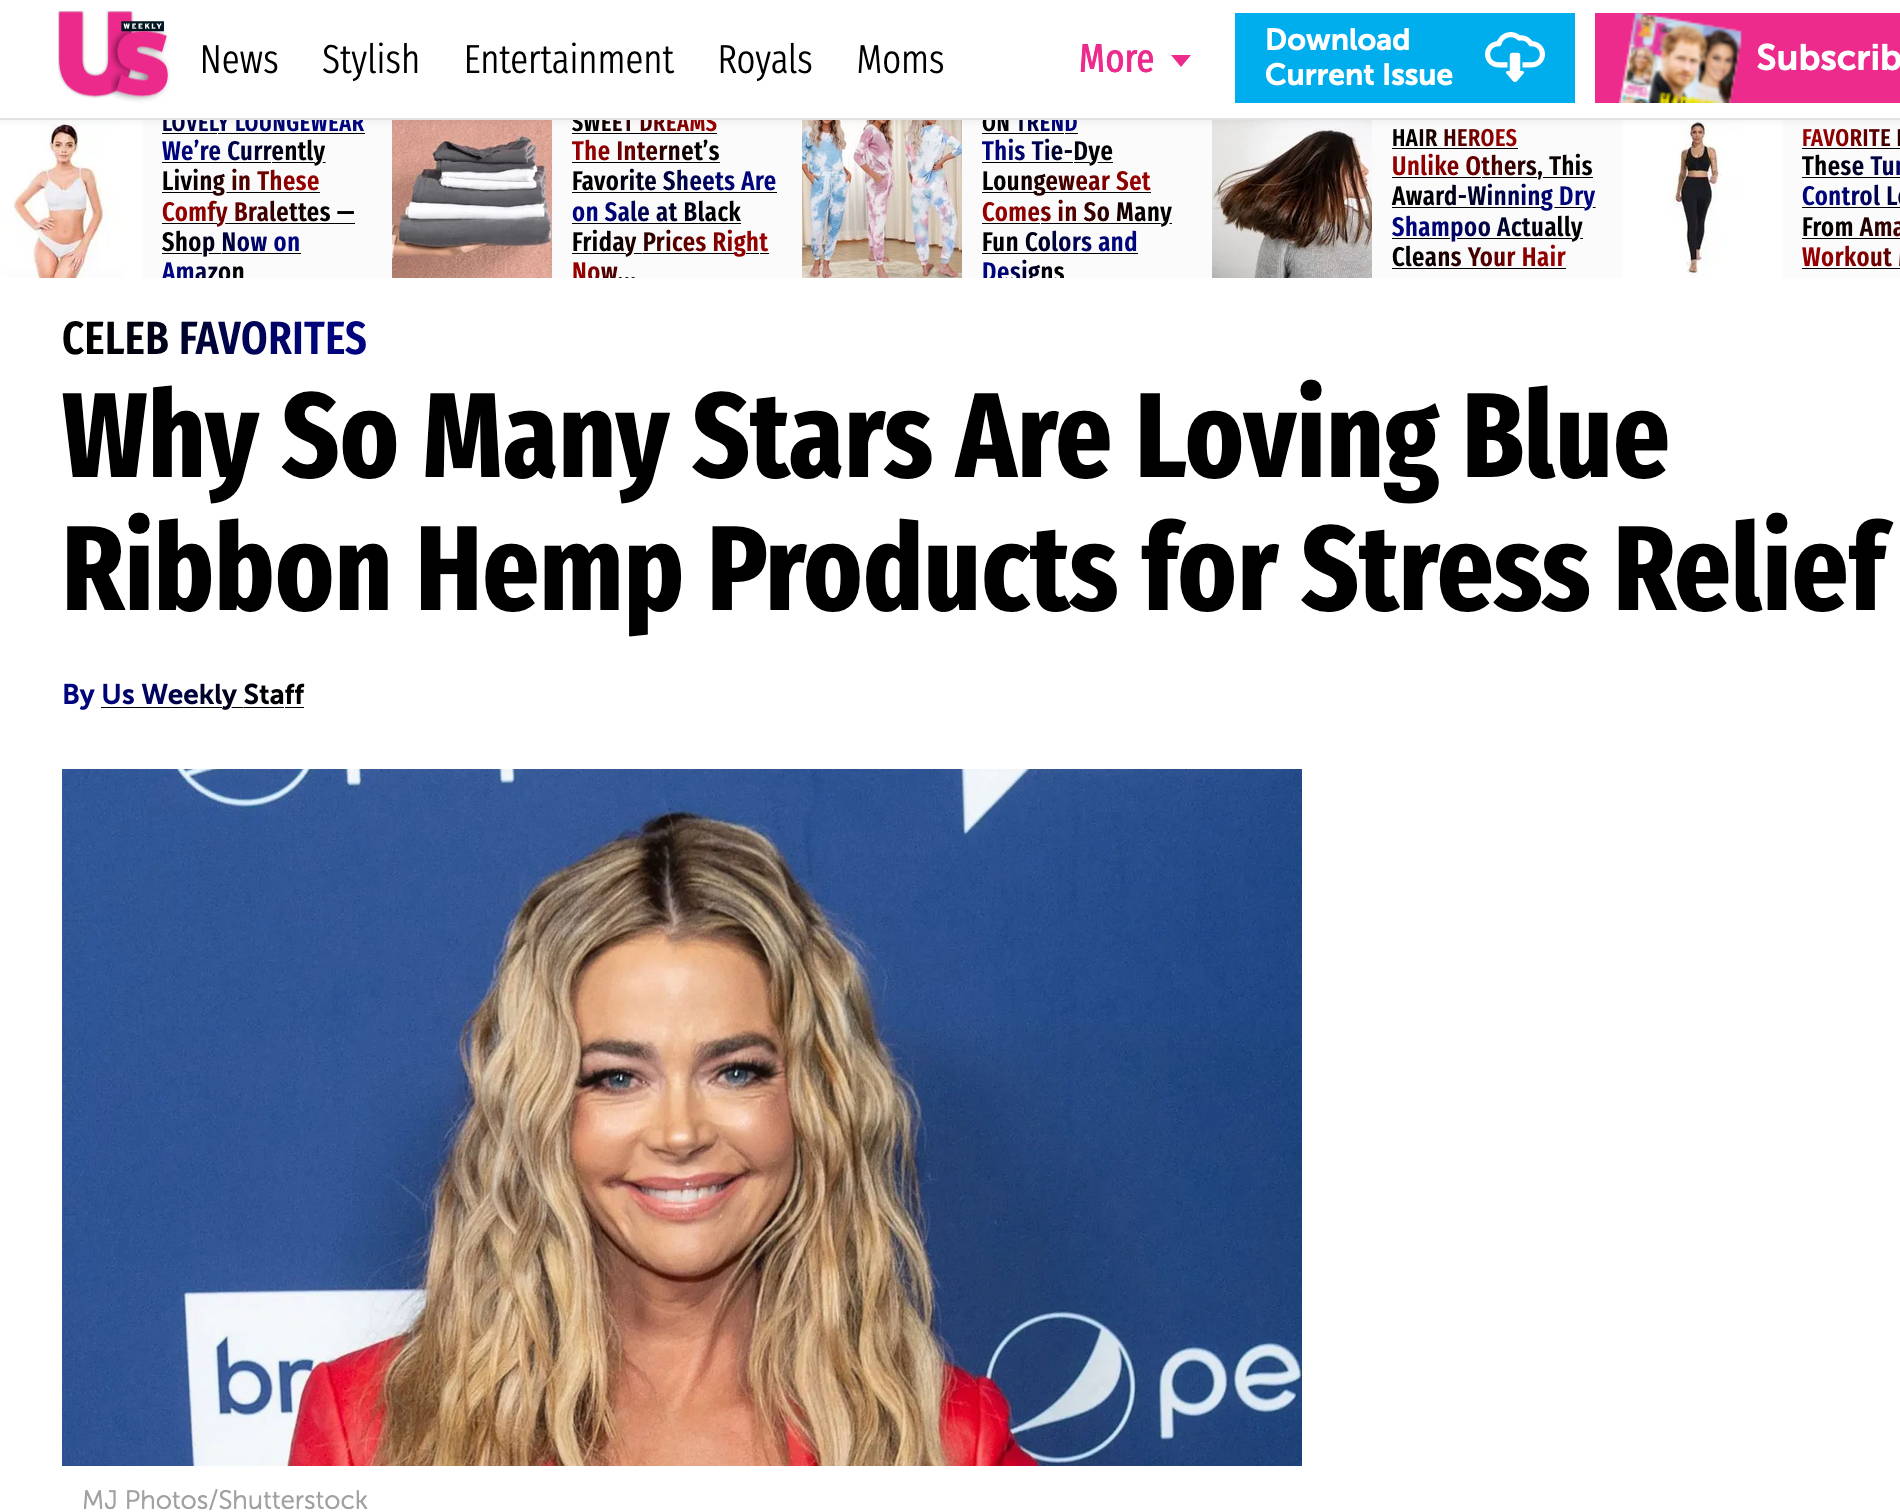 US Weekly: Why So Many Stars Are Loving Blue Ribbon Hemp Products for Stress Relief